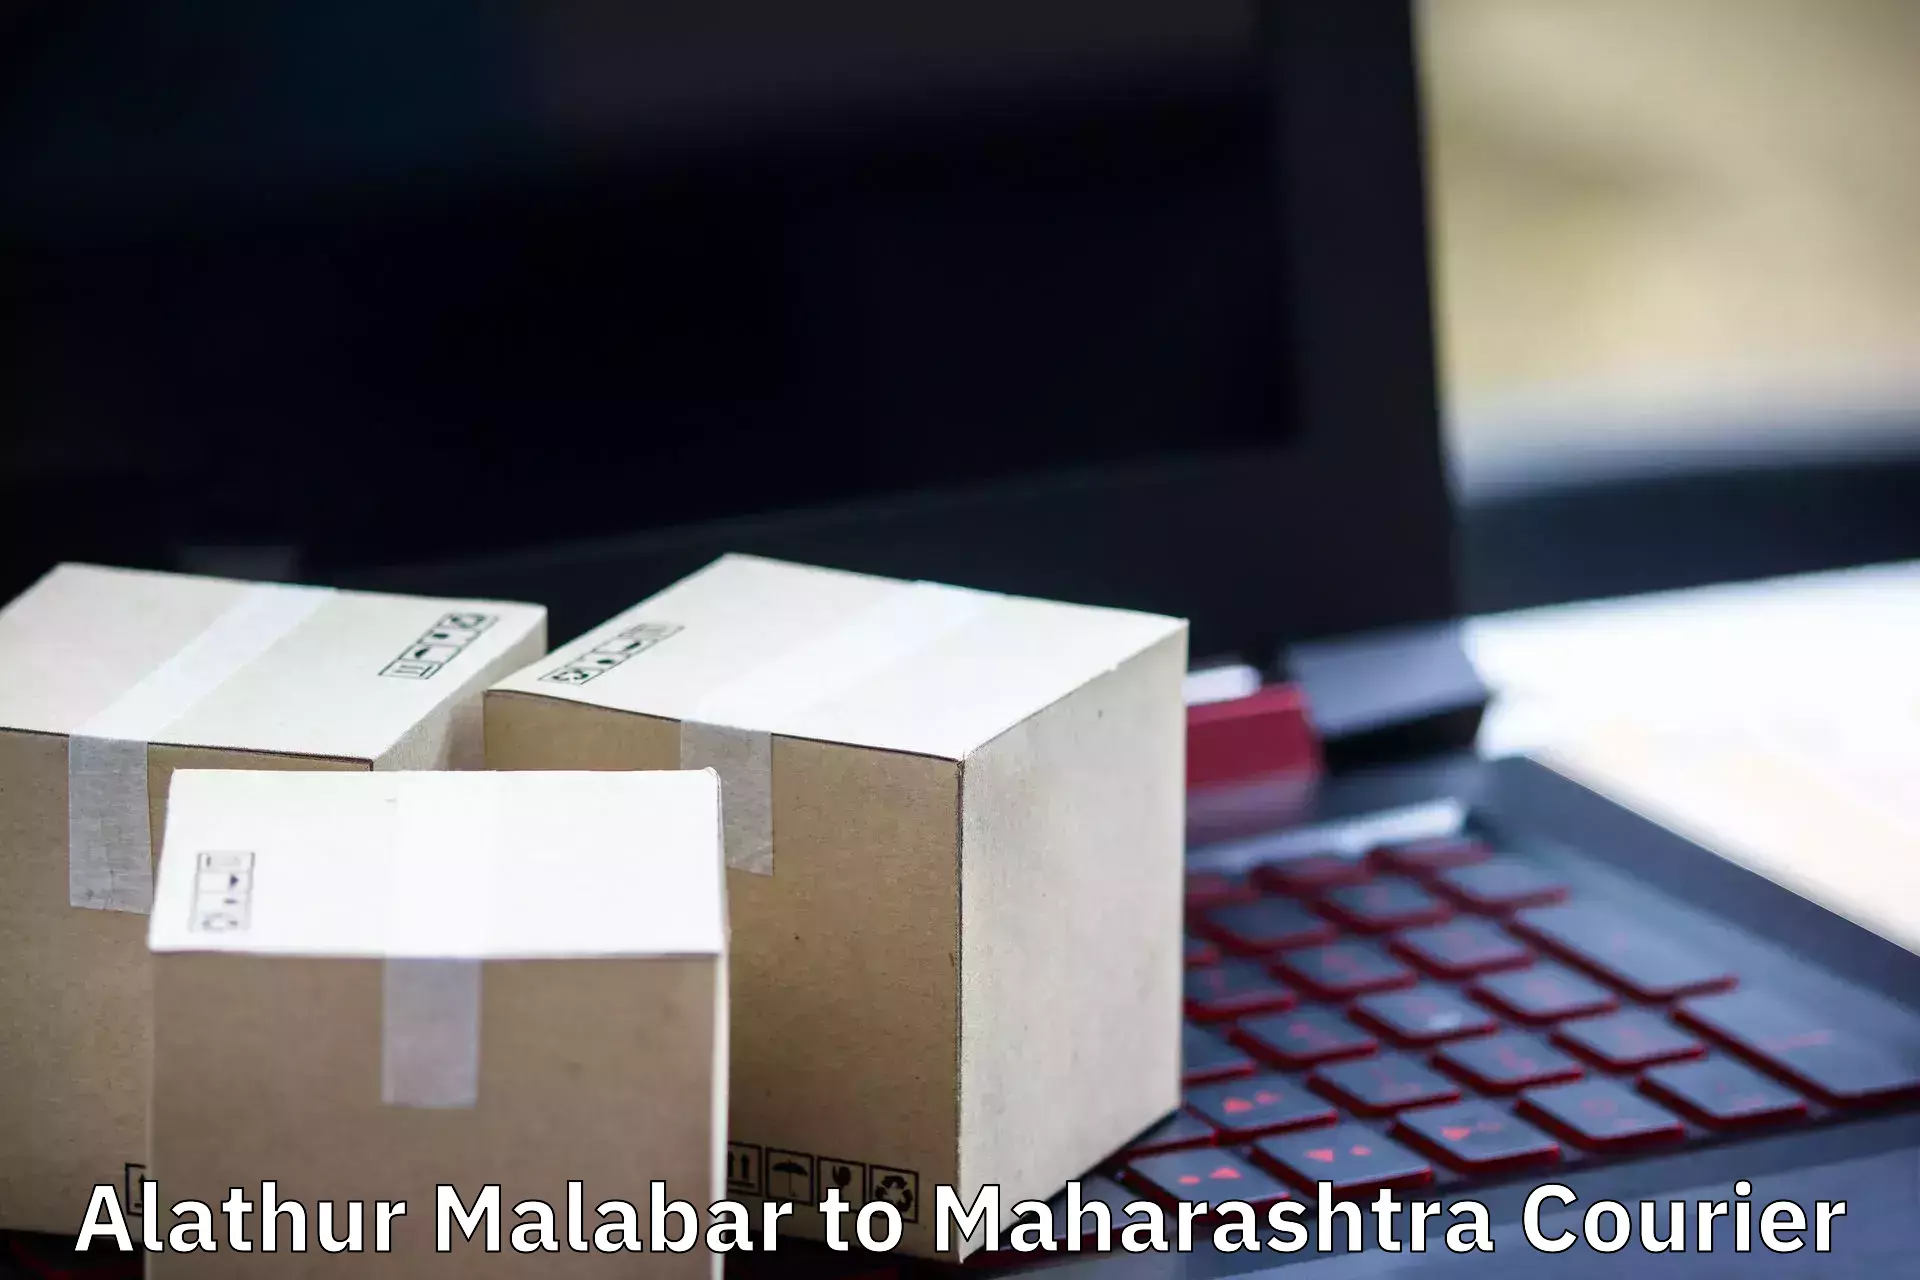 Quality relocation assistance Alathur Malabar to Yeola